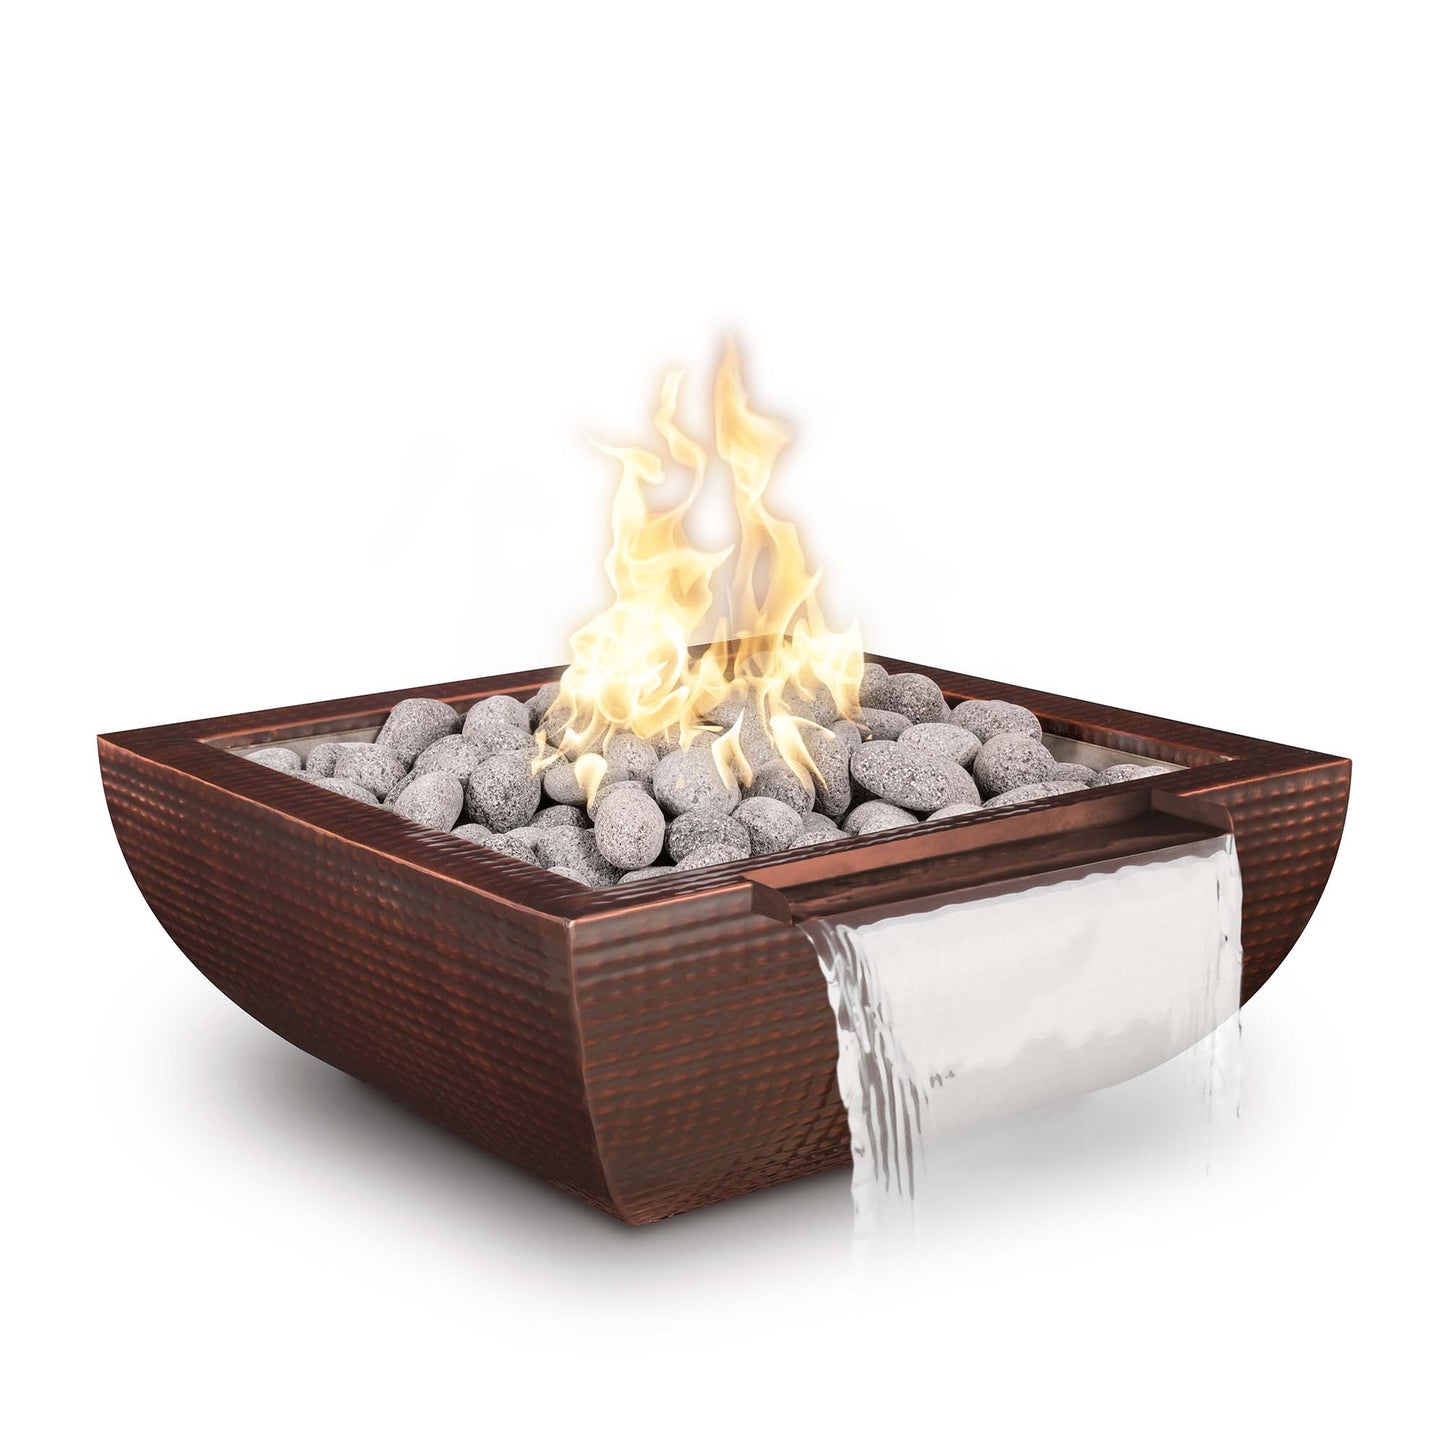 The Outdoor Plus Avalon Wide Spill 36" White Powder Coated Metal Liquid Propane Fire & Water Bowl with Match Lit Ignition